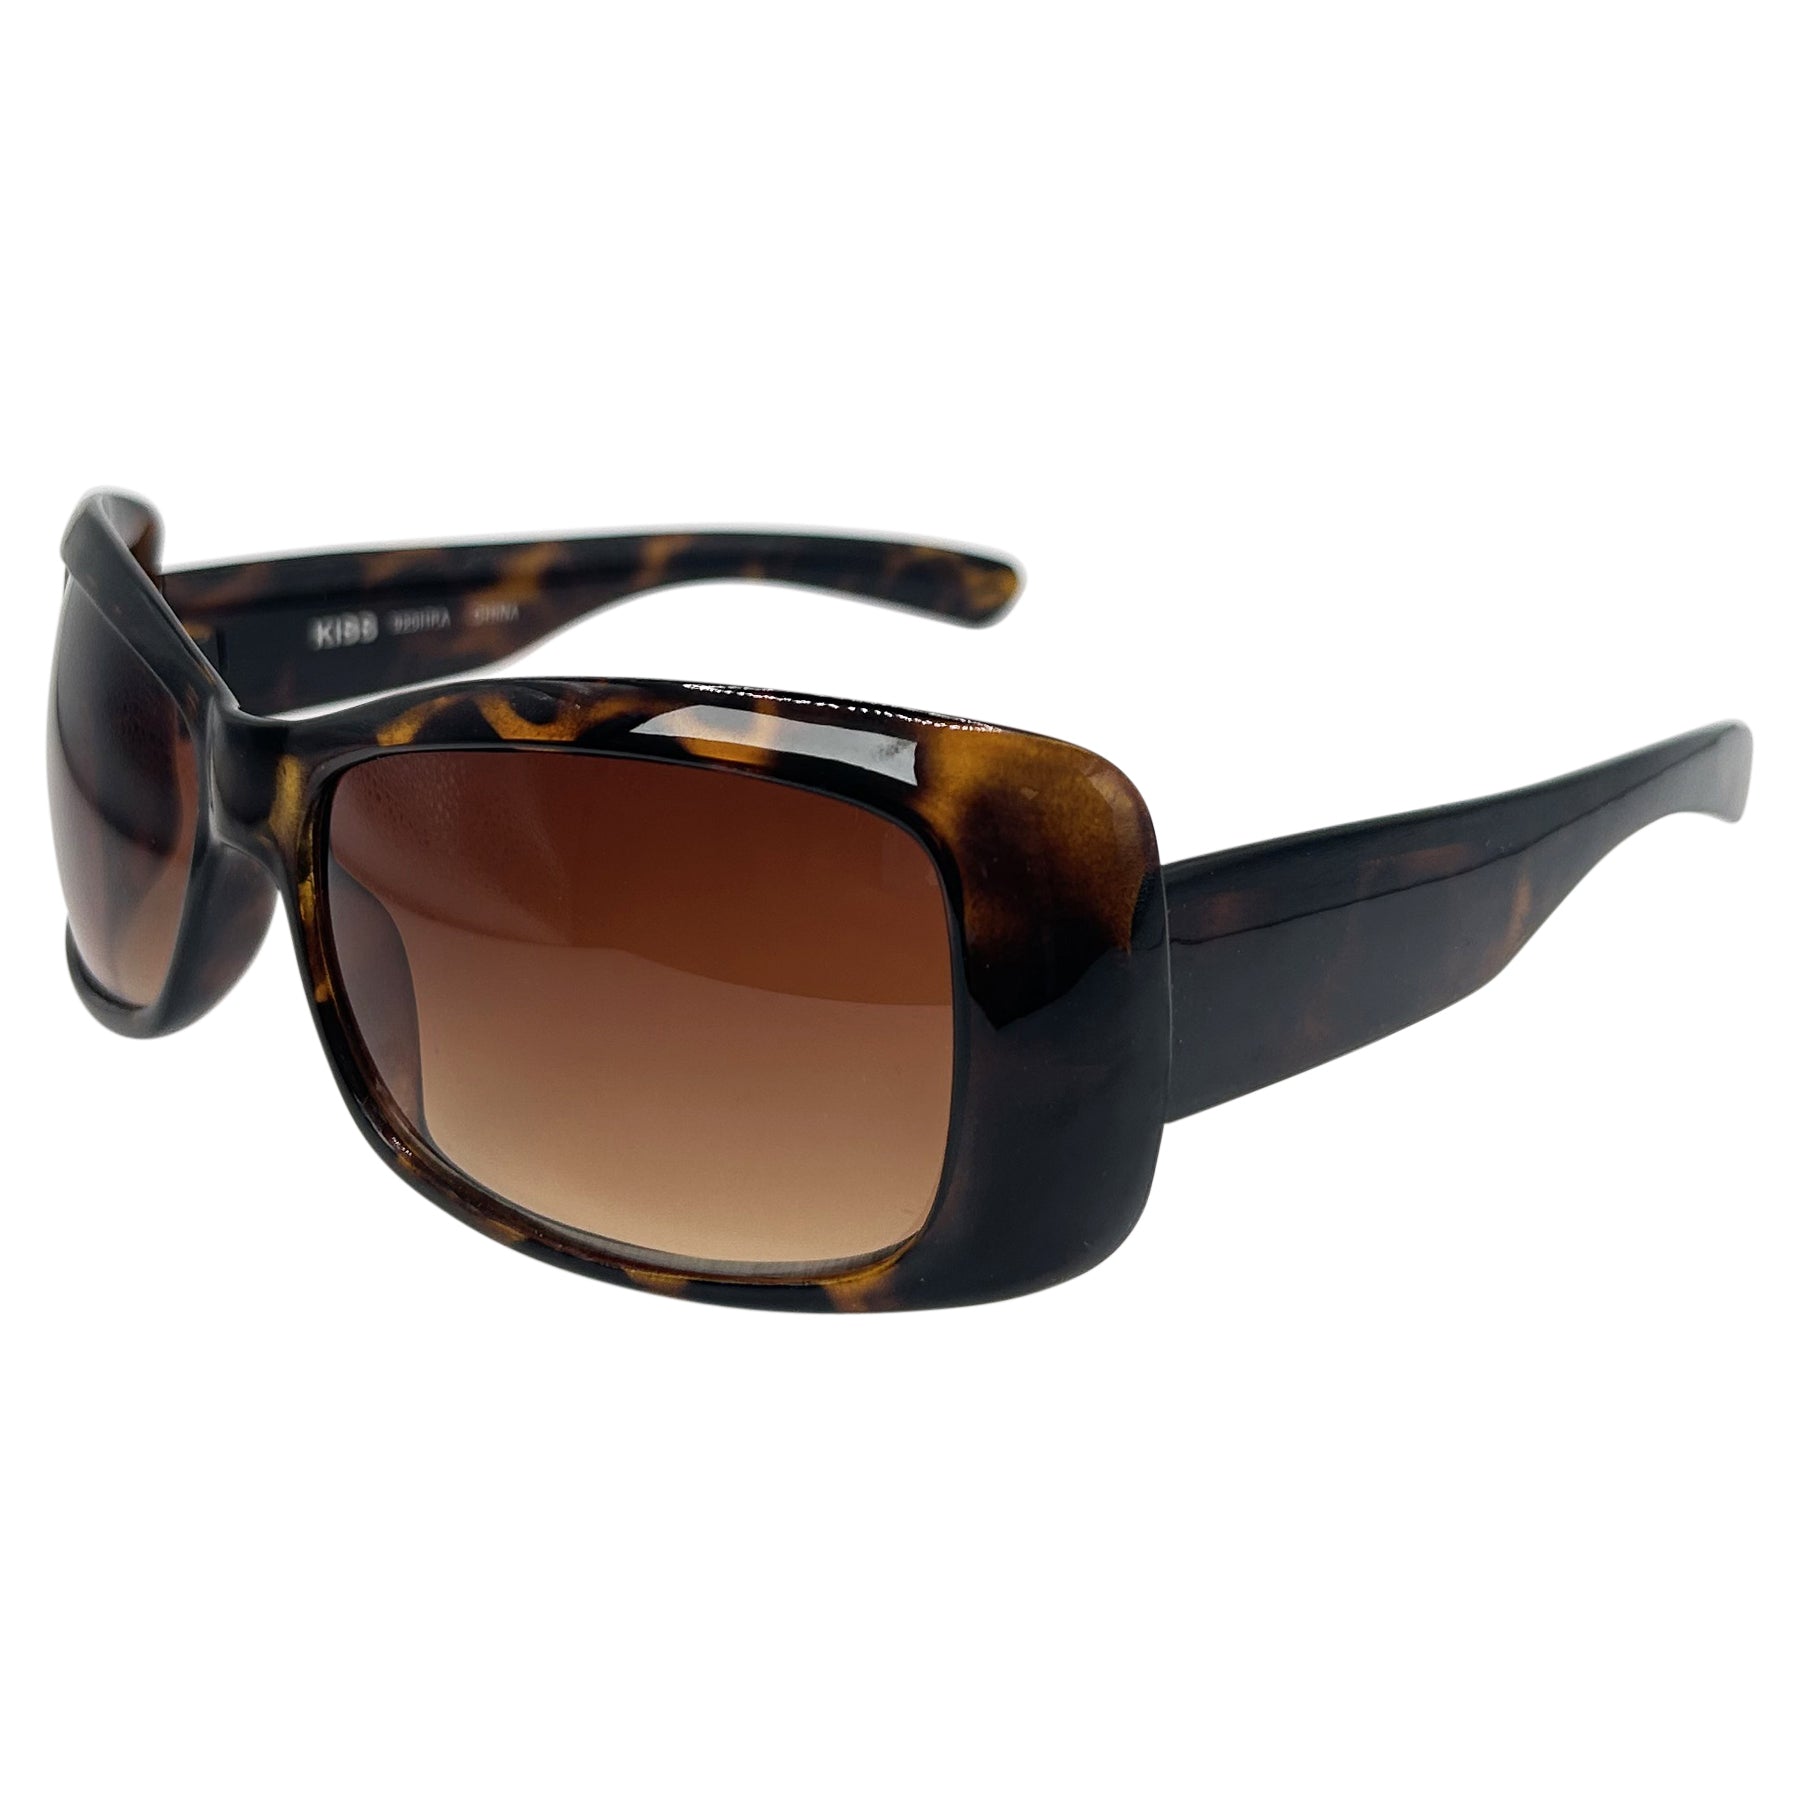 amber sunglasses with a tortoise shell and wraparound 90s style